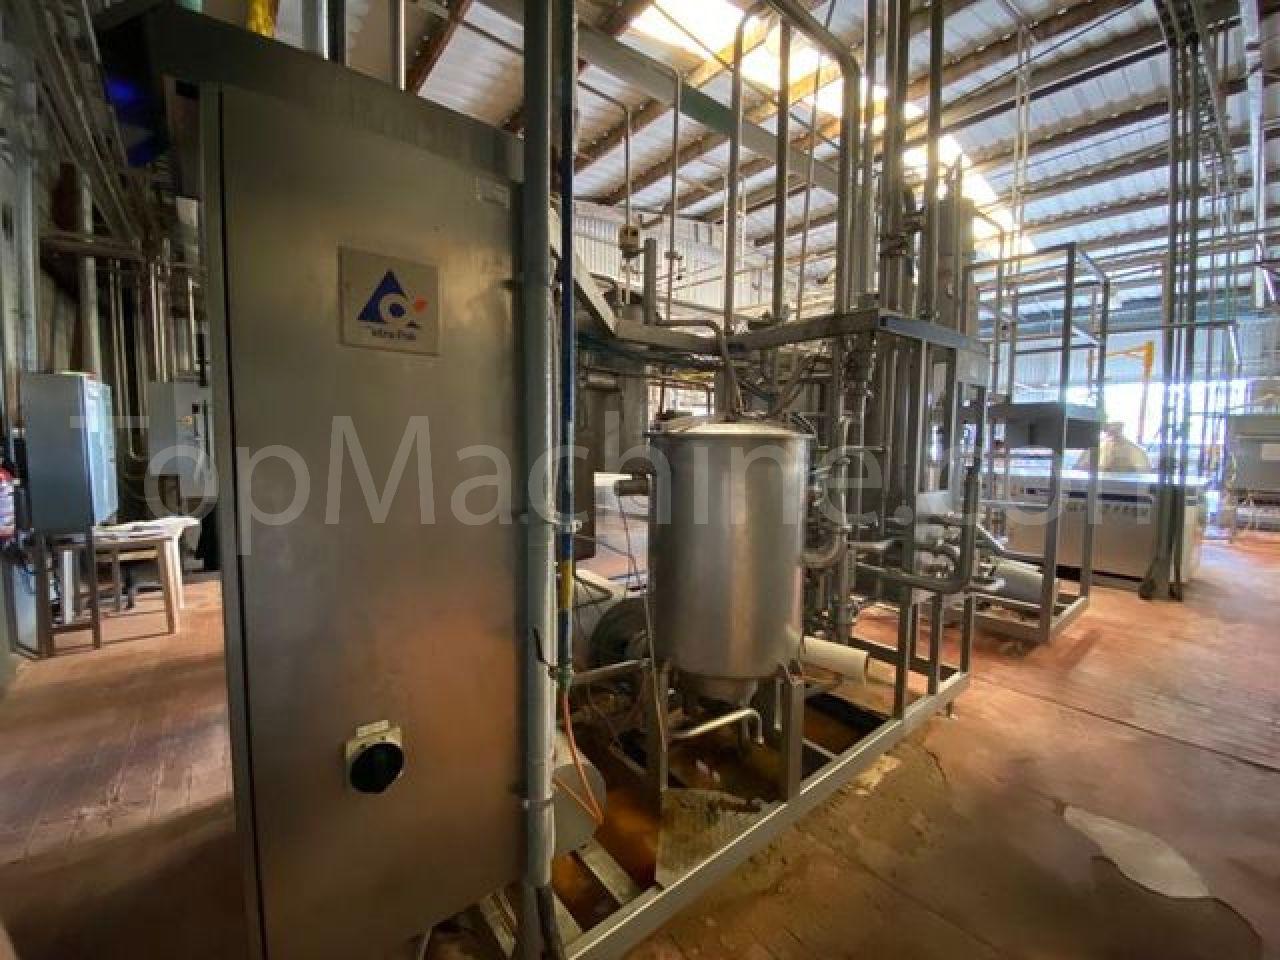 Used Tetra Pak Tetra Therm Aseptic Flex 7 Dairy & Juices Pasteurizer